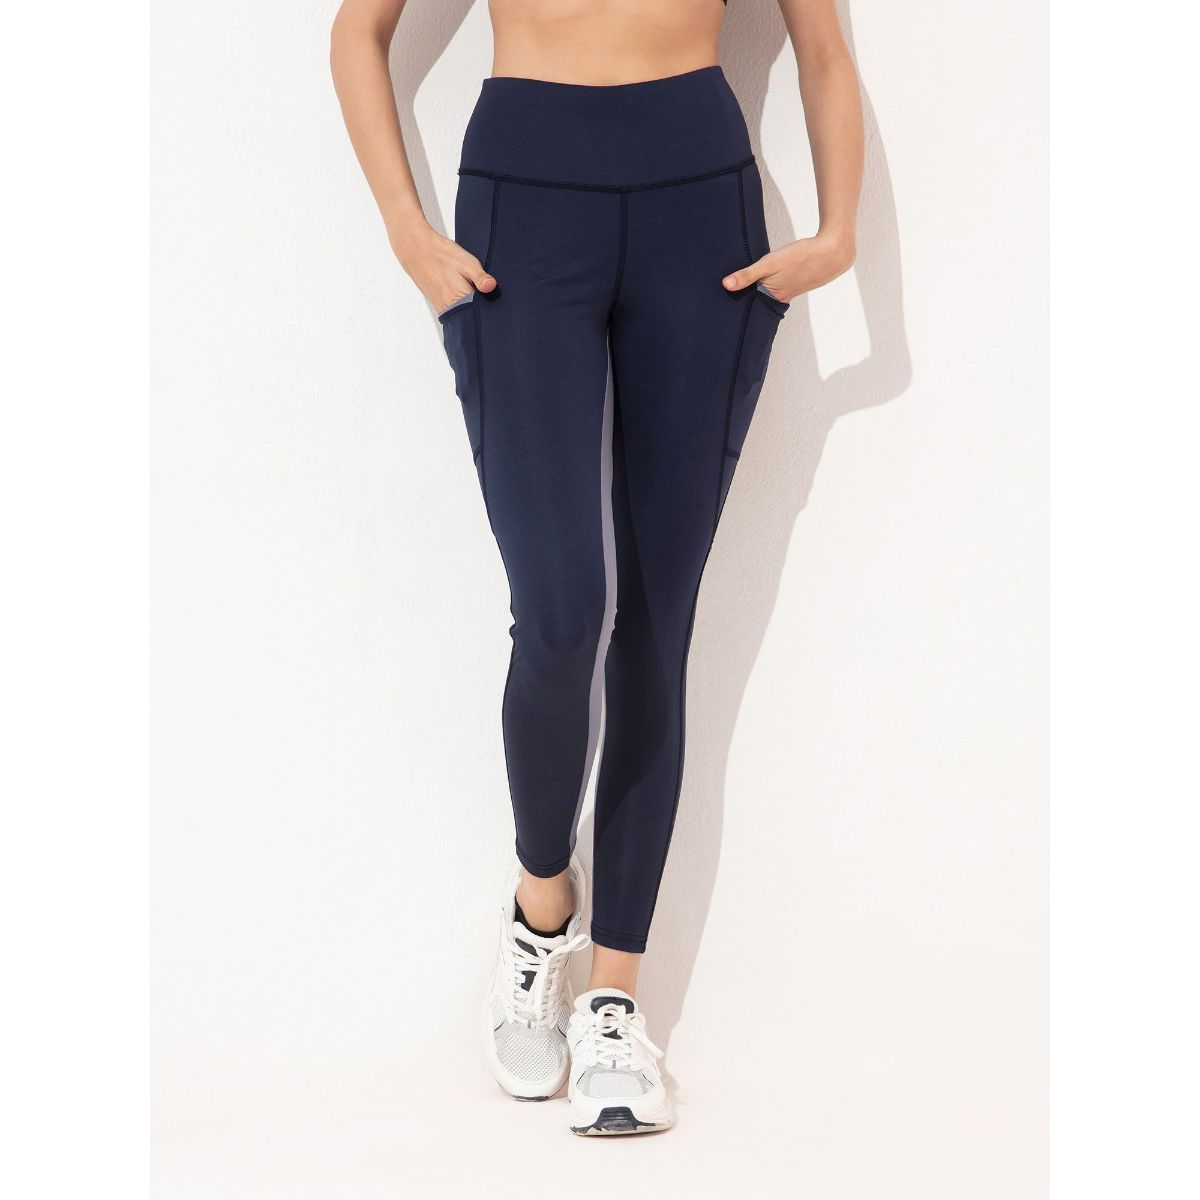 Buy Kica Sway High Waisted Leggings With Color Block Inseam For